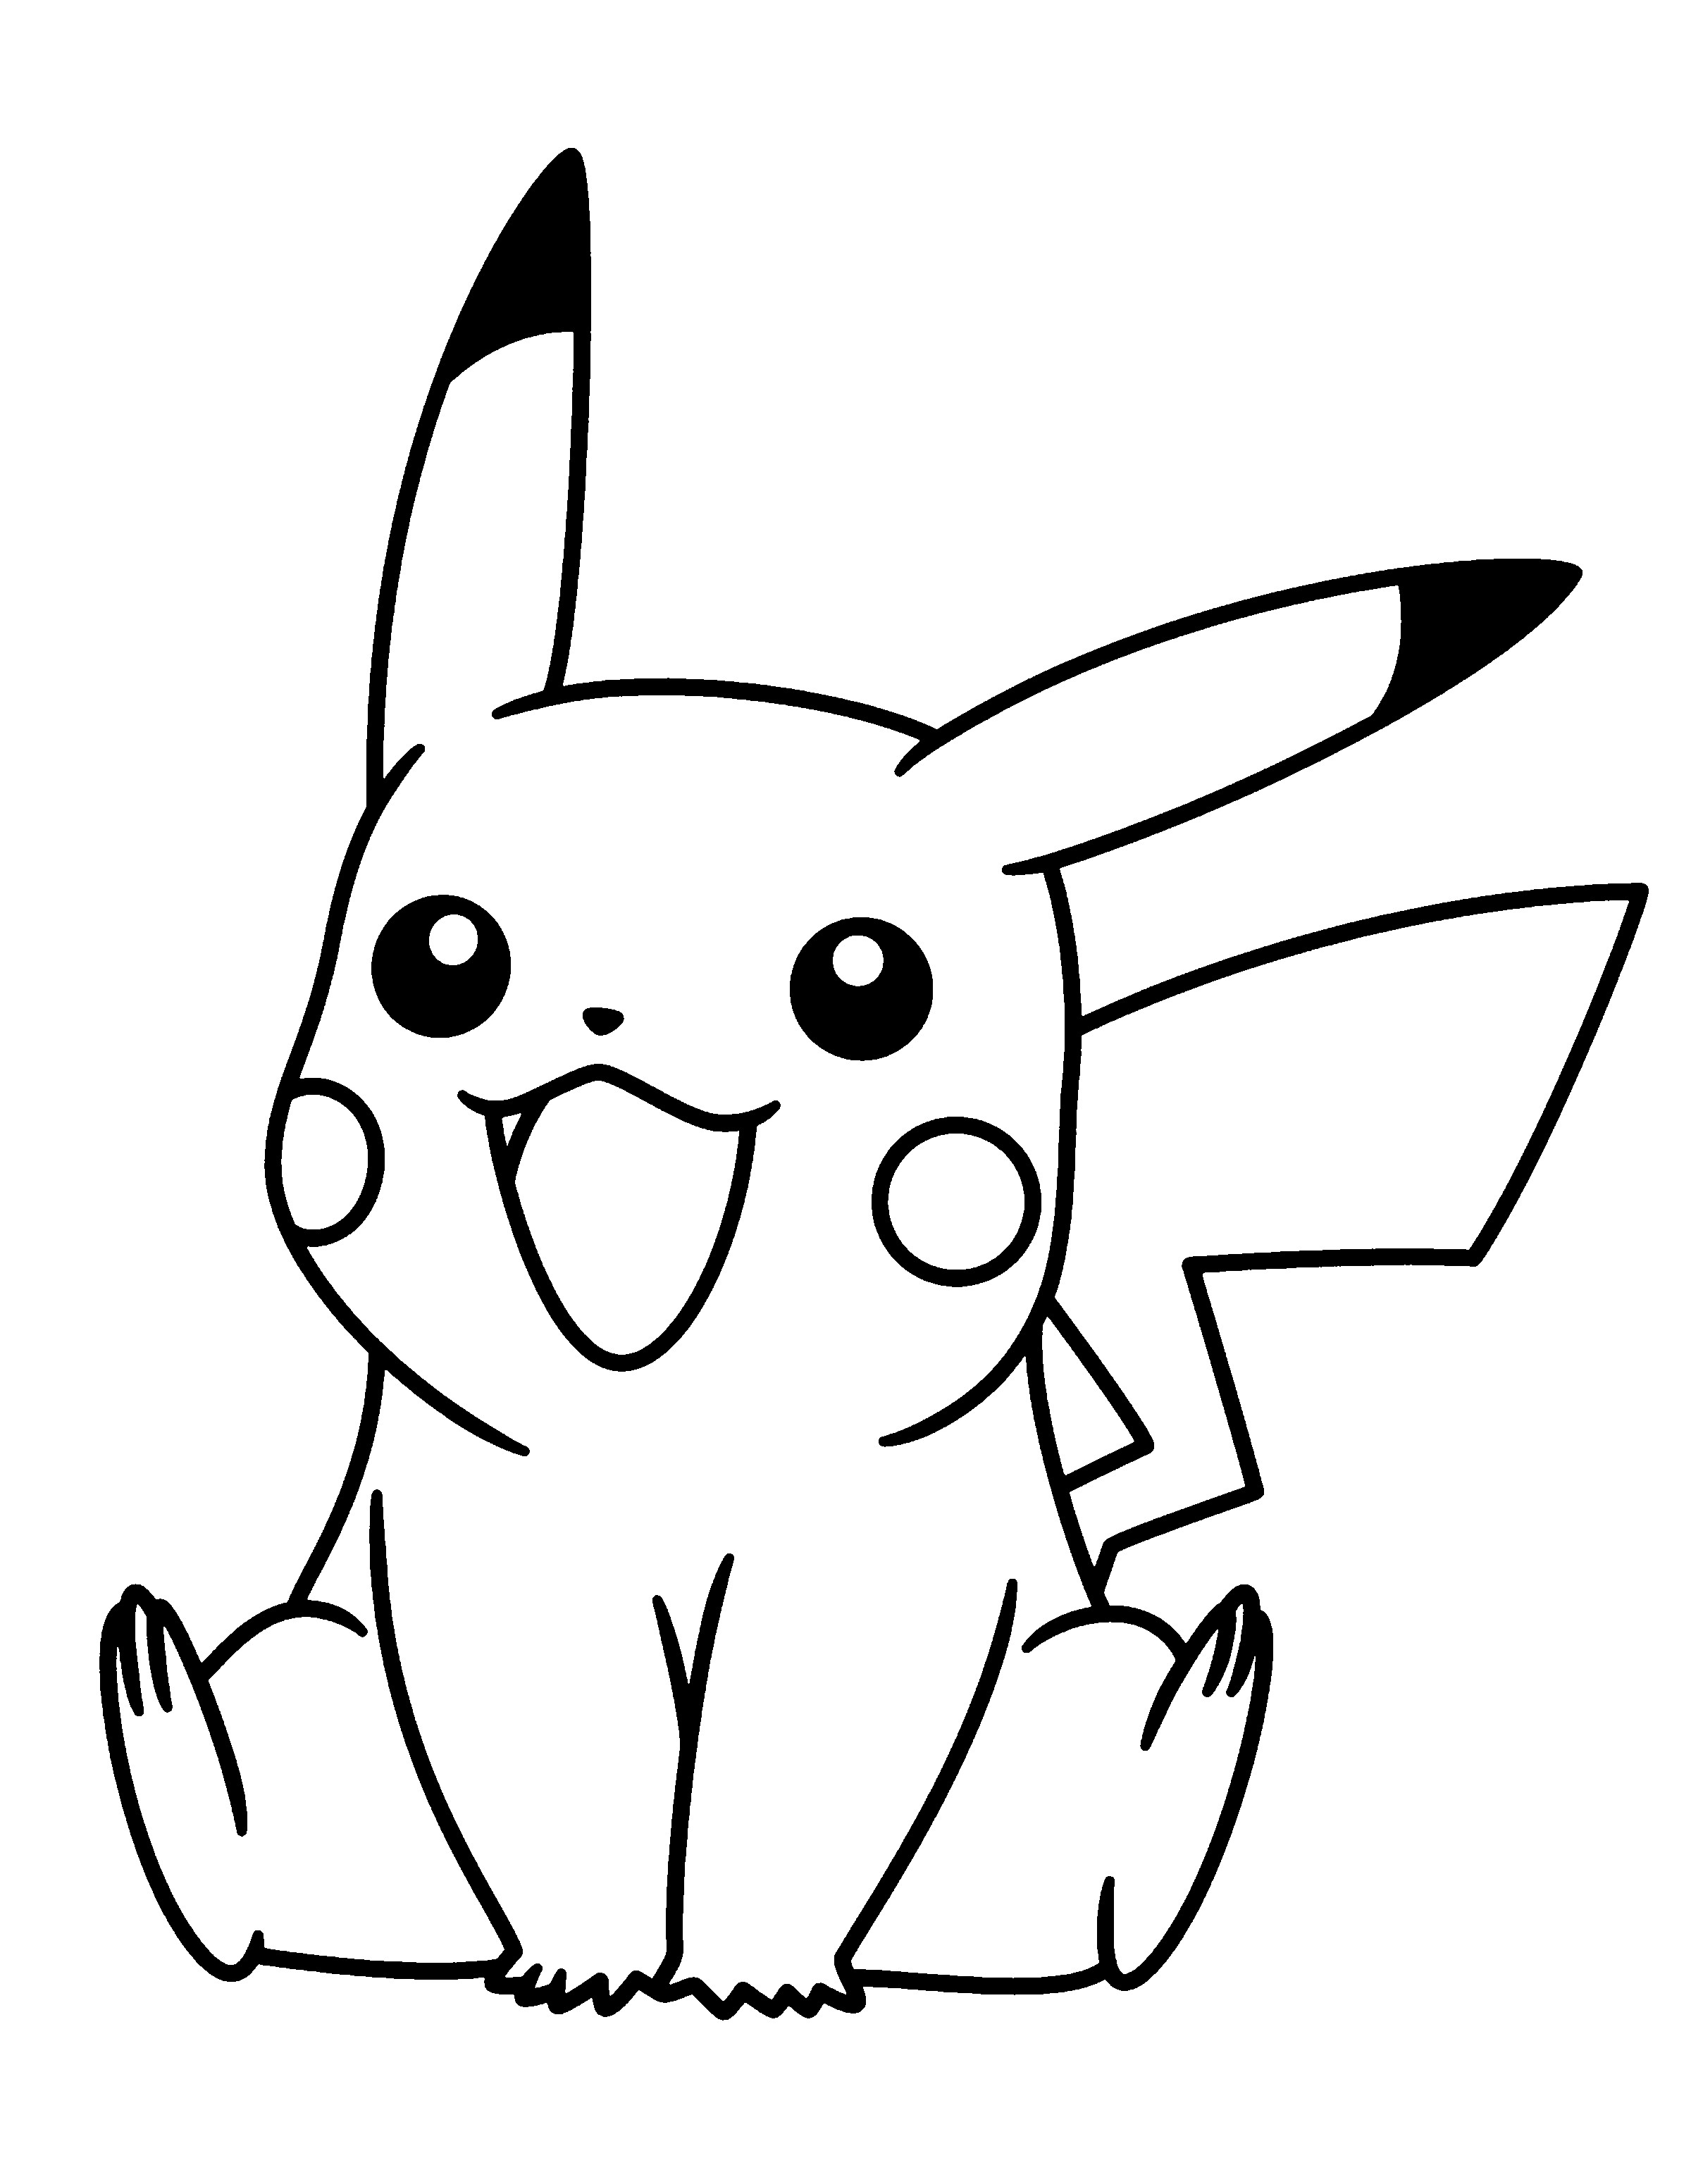 Pikachu Mask Coloring Pages Wallpaper